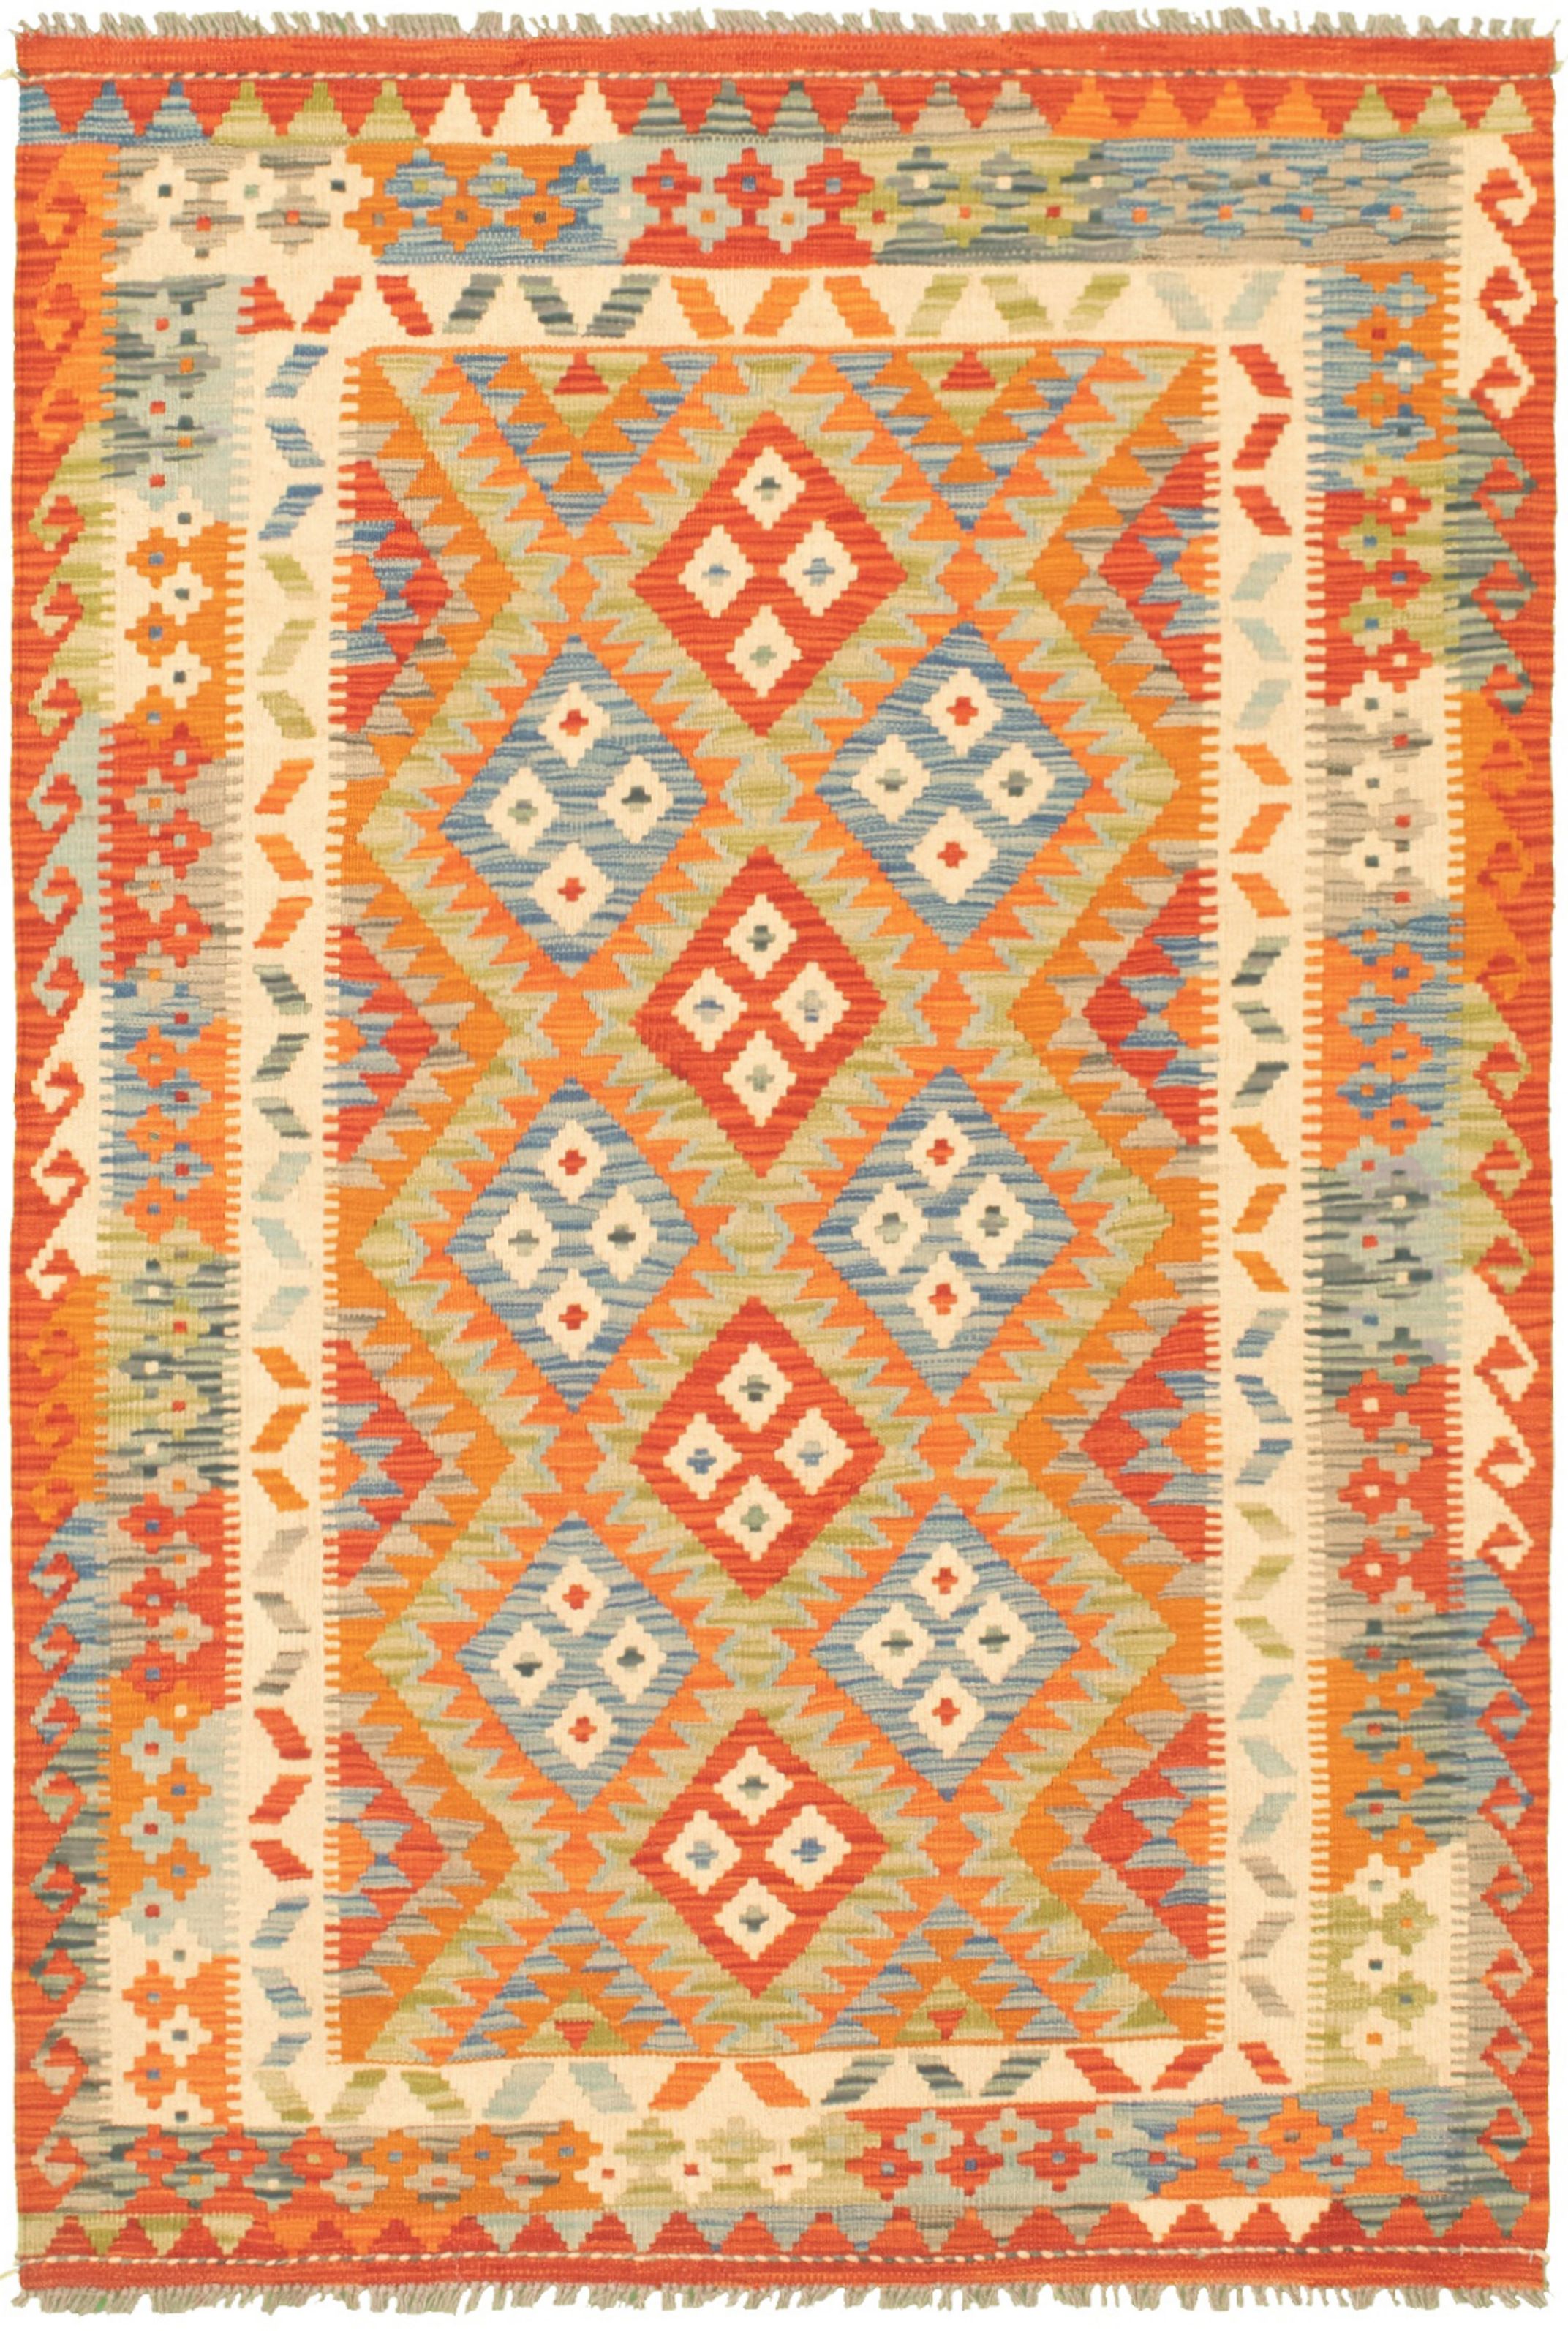 Hand woven Bold and Colorful  Dark Copper Wool Kilim 4'3" x 6'3"  Size: 4'3" x 6'3"  